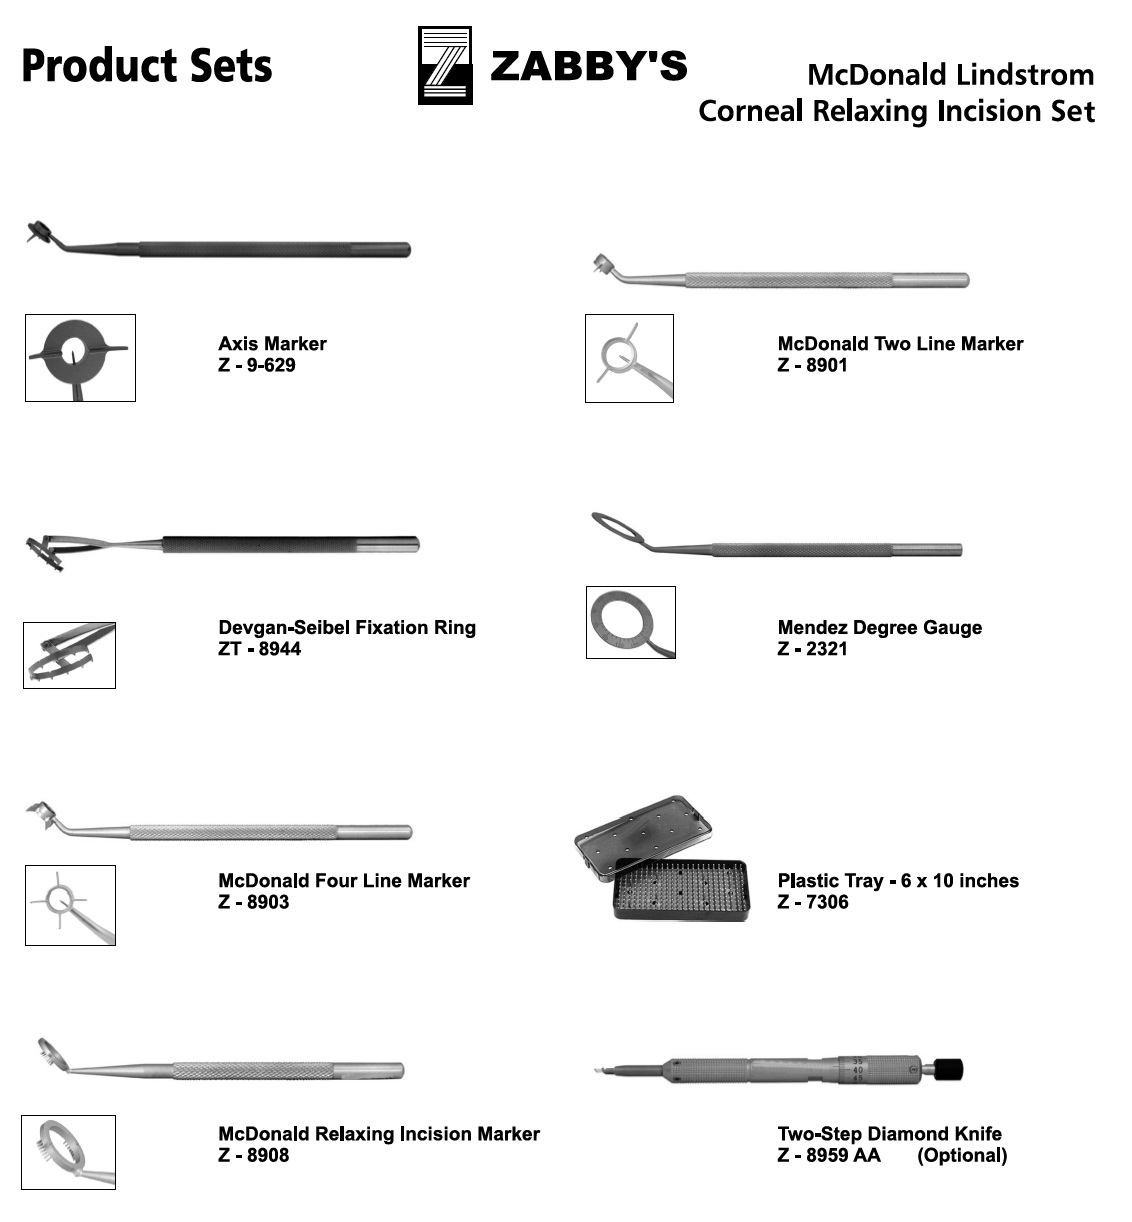 ZABBYS CORNEAL RELAXING INCISION SET EXCLUDING OPTIONAL ITEMS